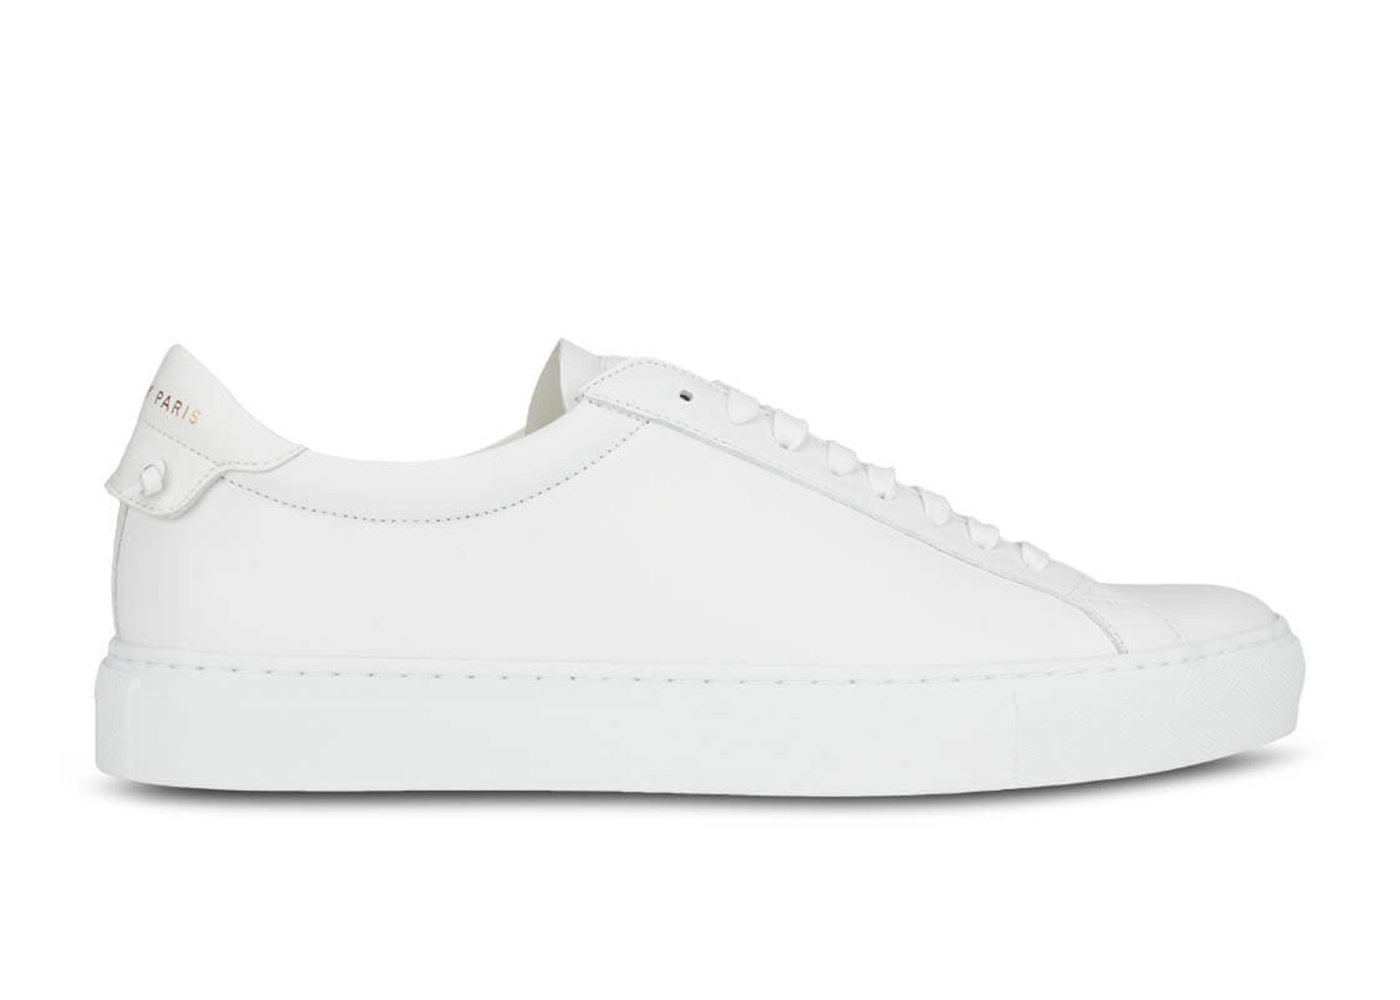 Givenchy Urban Street Low White - BH0002H0FT-100